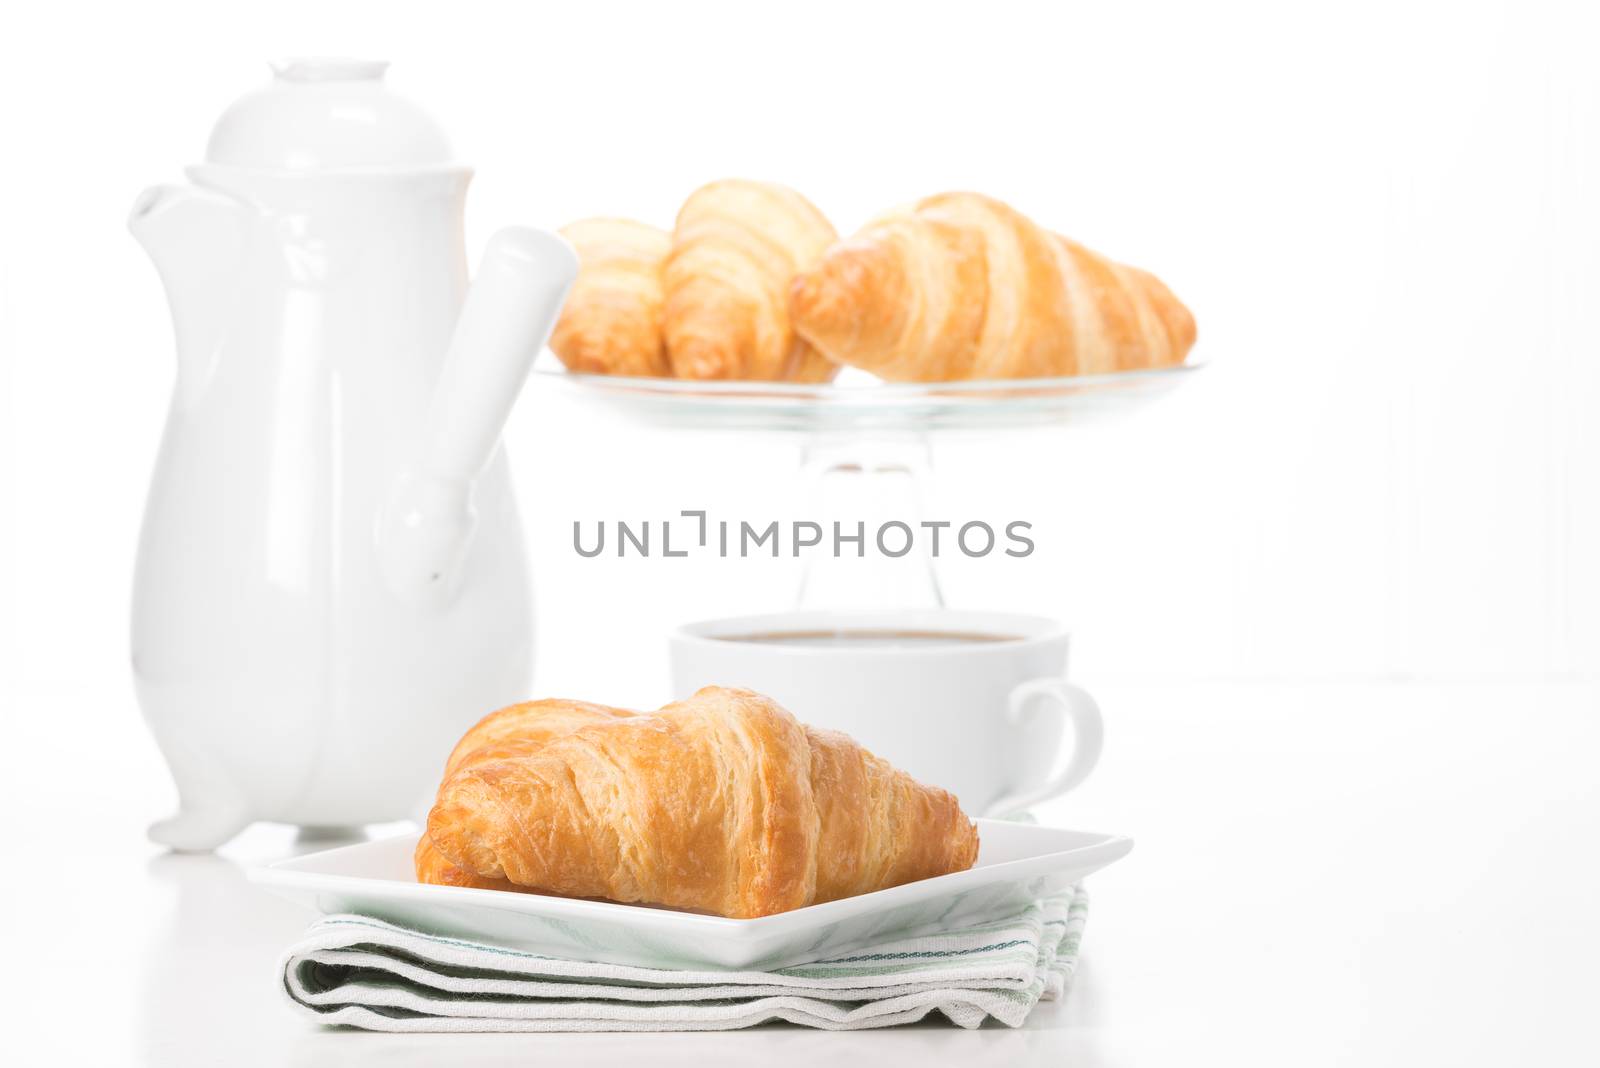 Fresh buttery croissants served with a cup of coffee.